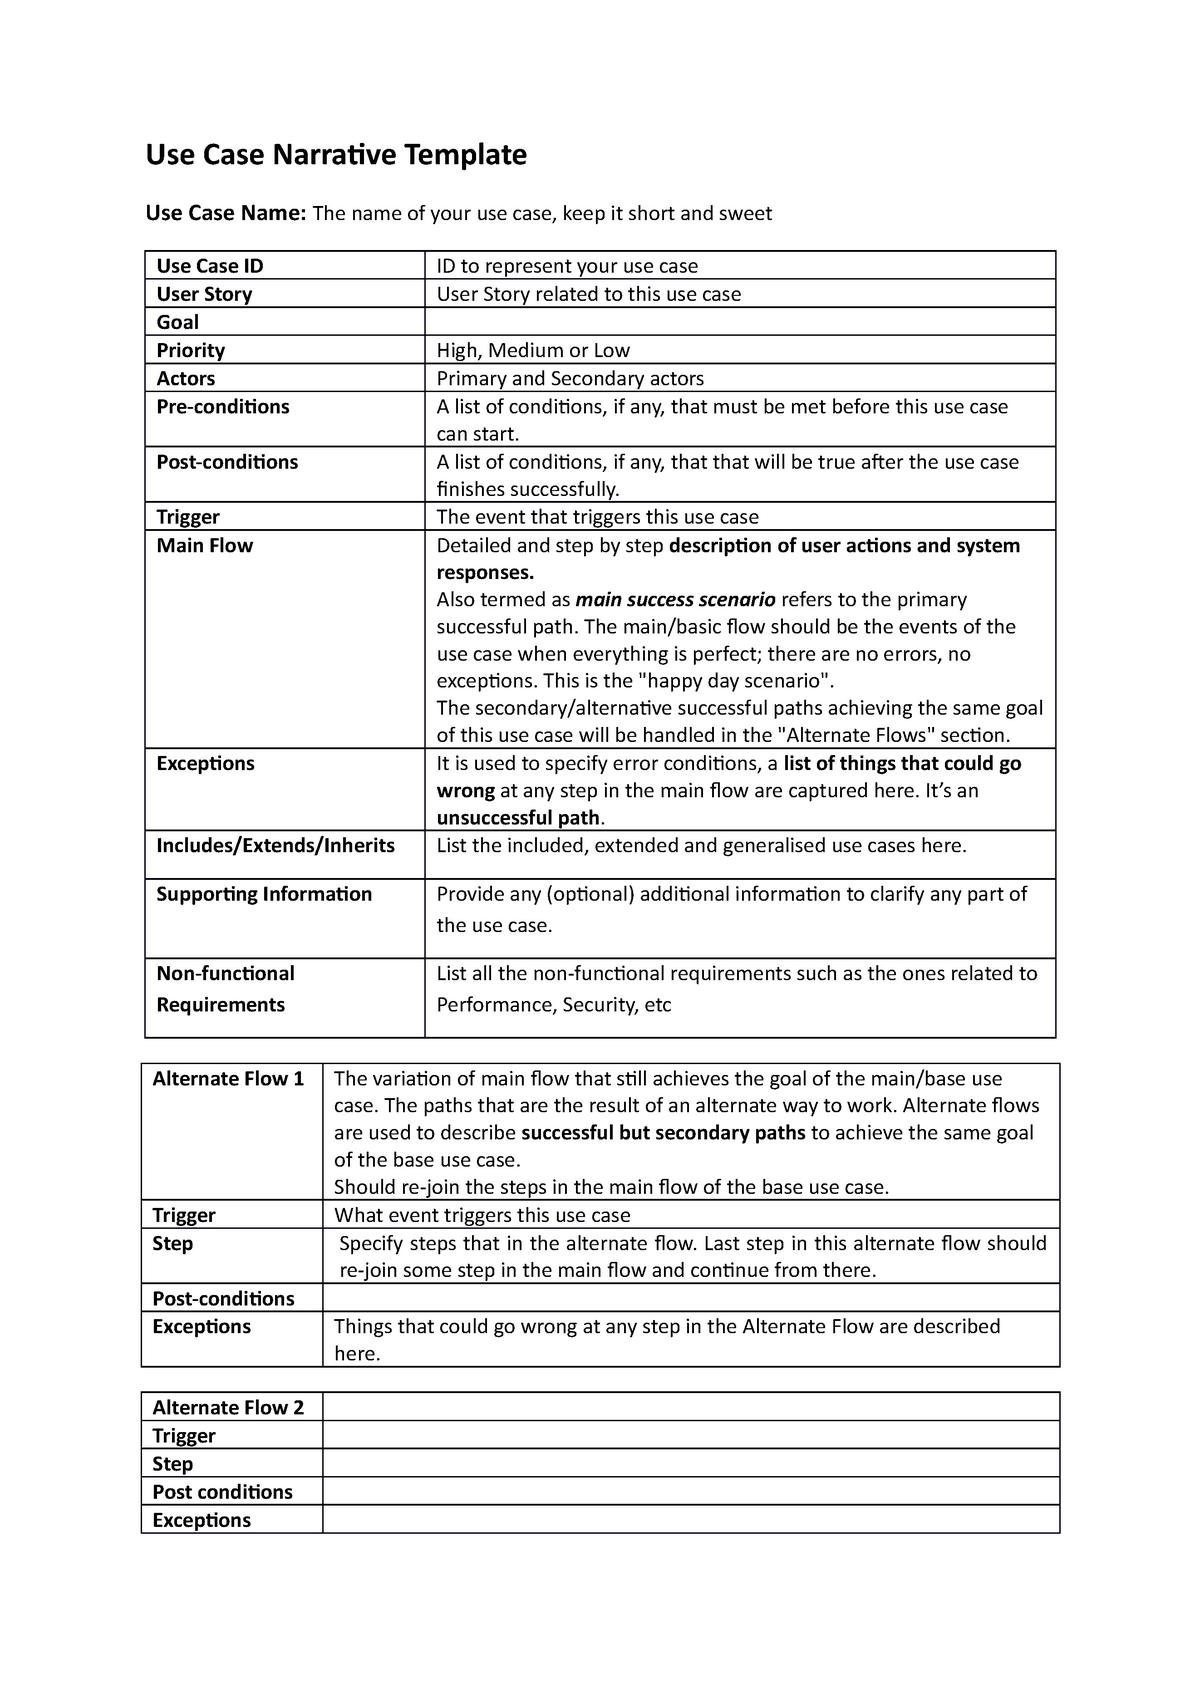 Use Case Narrative Template(23) - 23 - Business Requirements Pertaining To Business Process Narrative Template